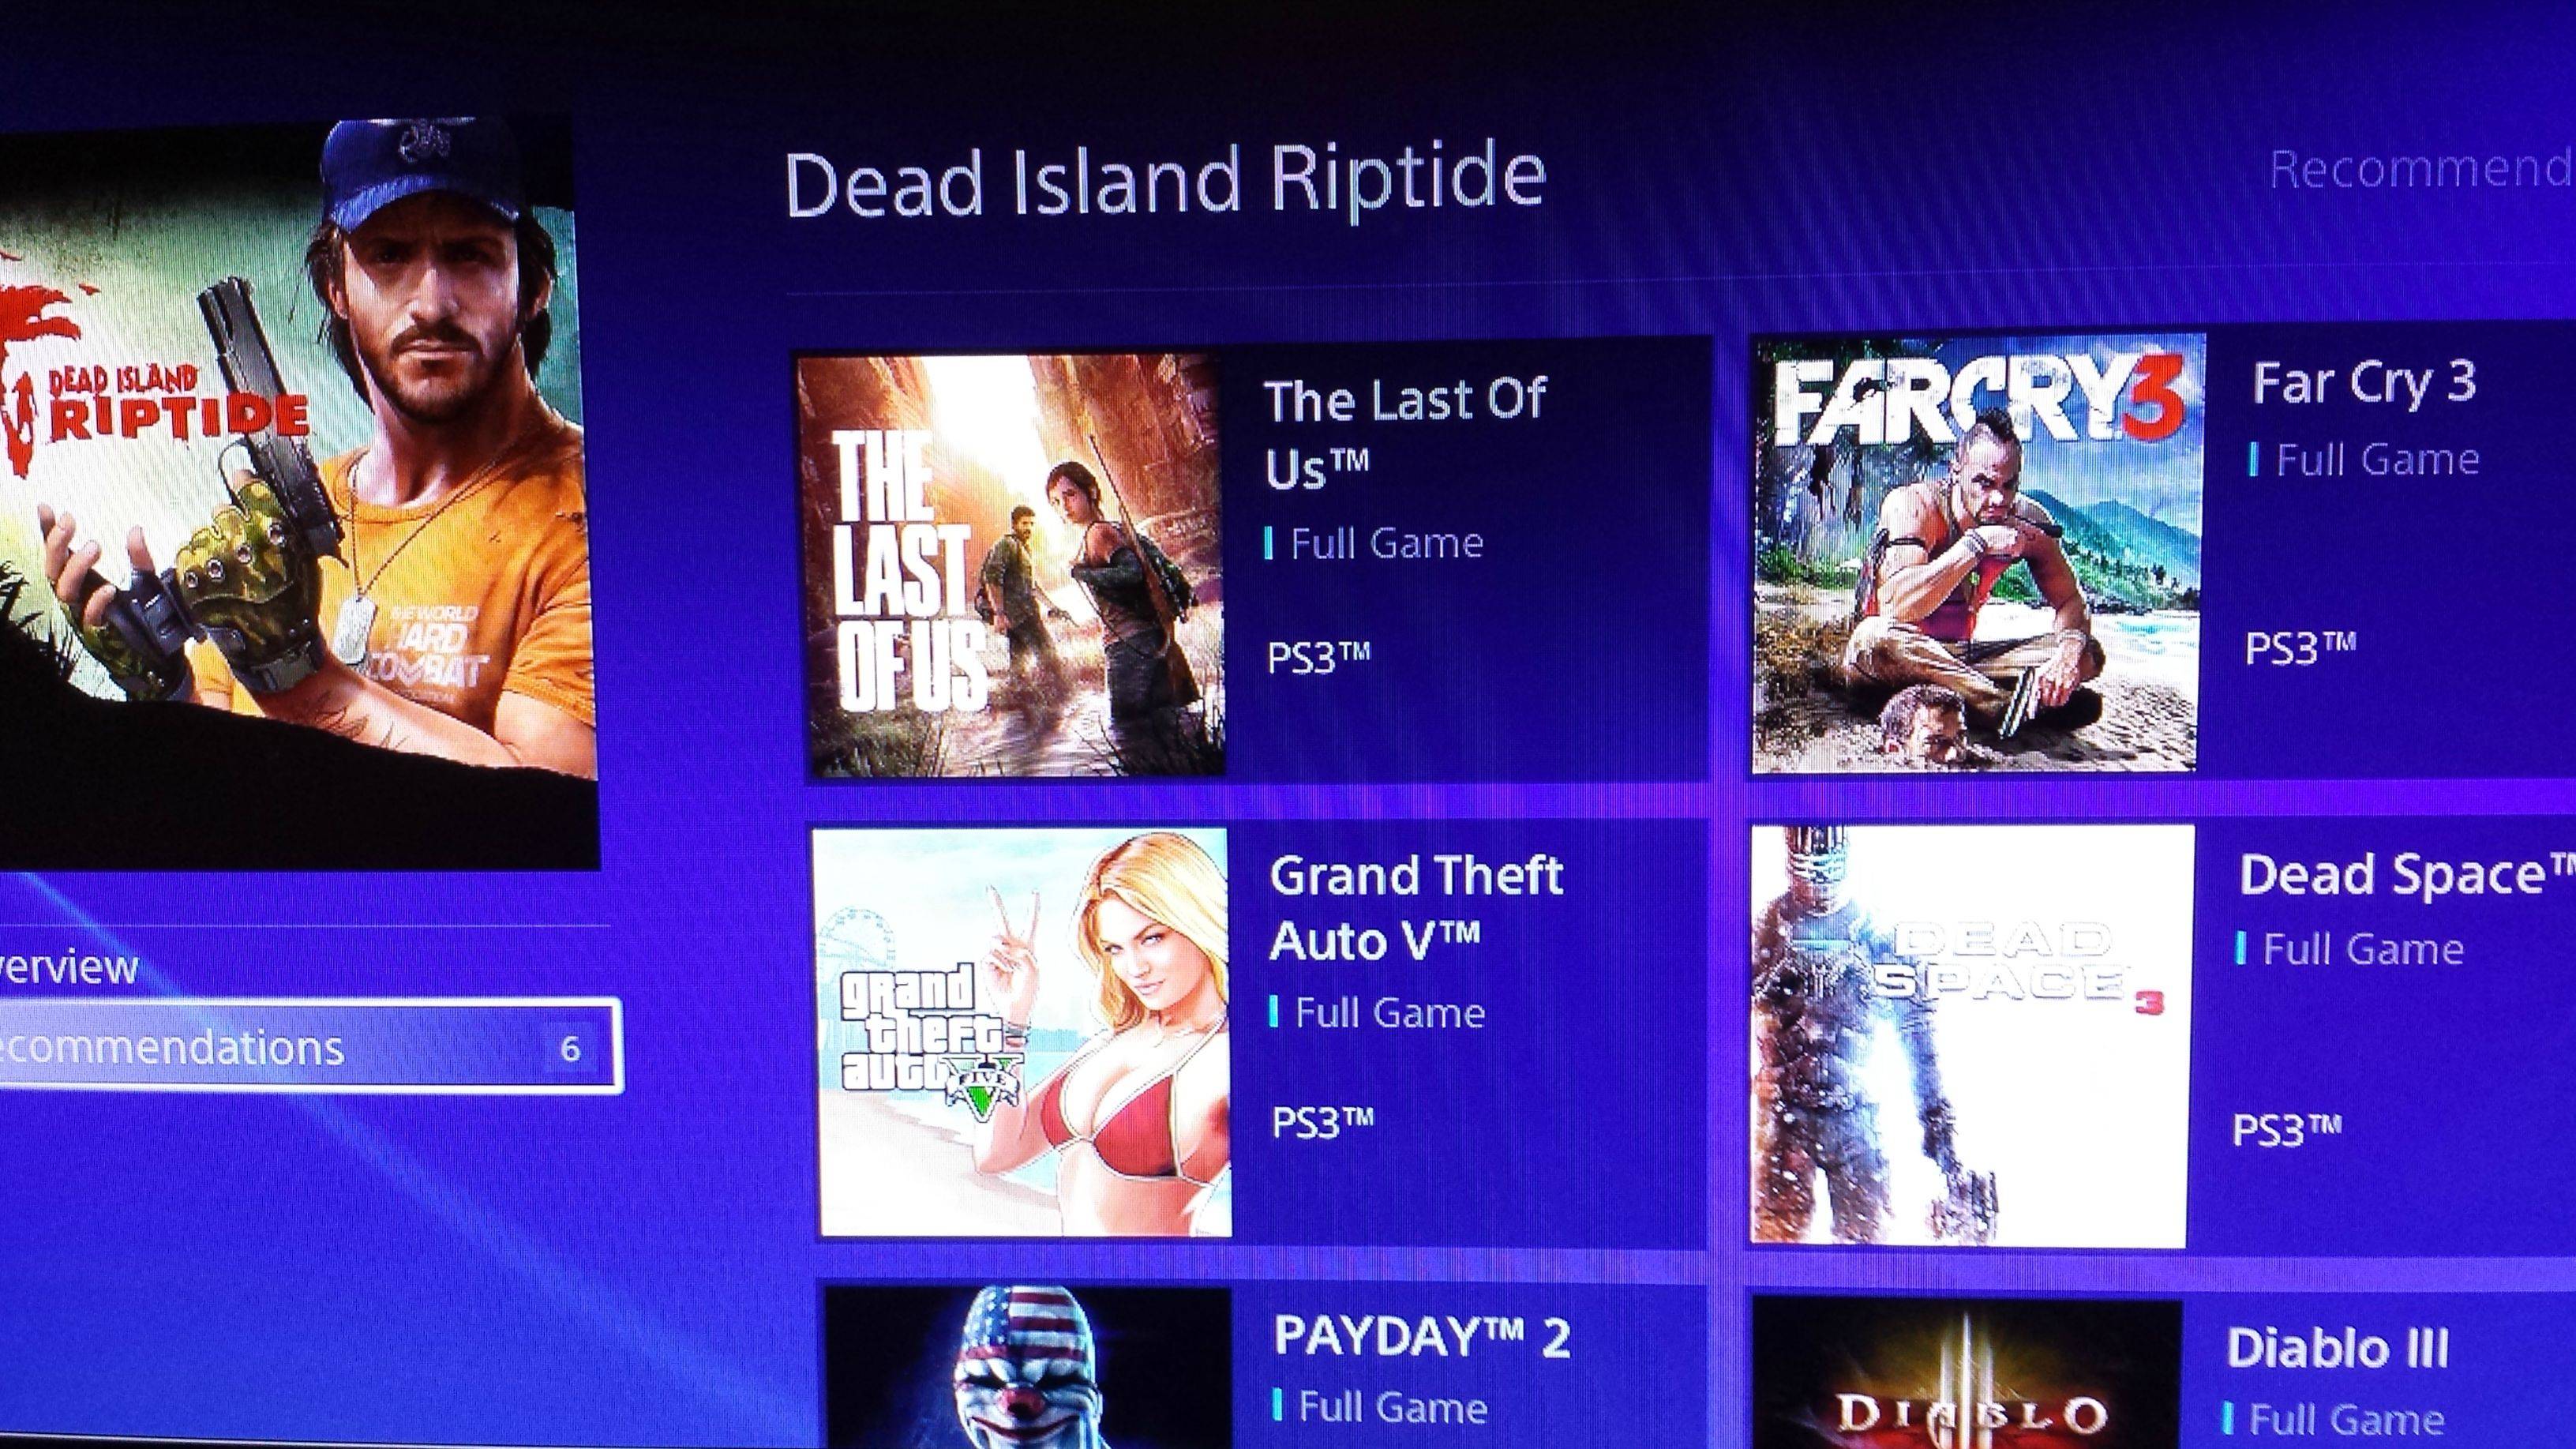 Correspondentie blad zij is PS3 Games Seen on PS4 Store, May Indicate Potential PlayStation Now Launch  Titles